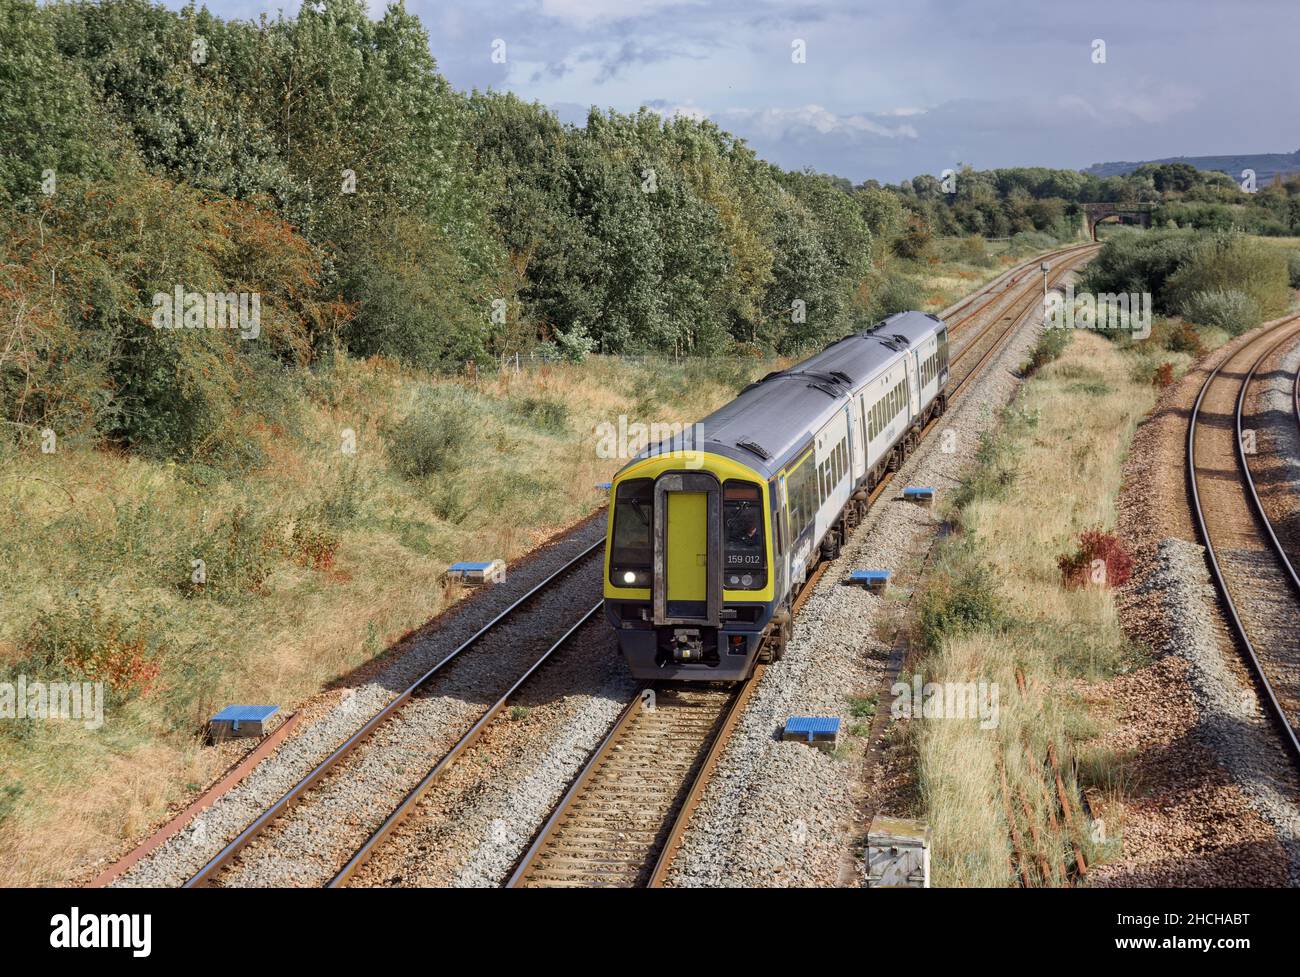 freight and passenger trains in westbury Stock Photo